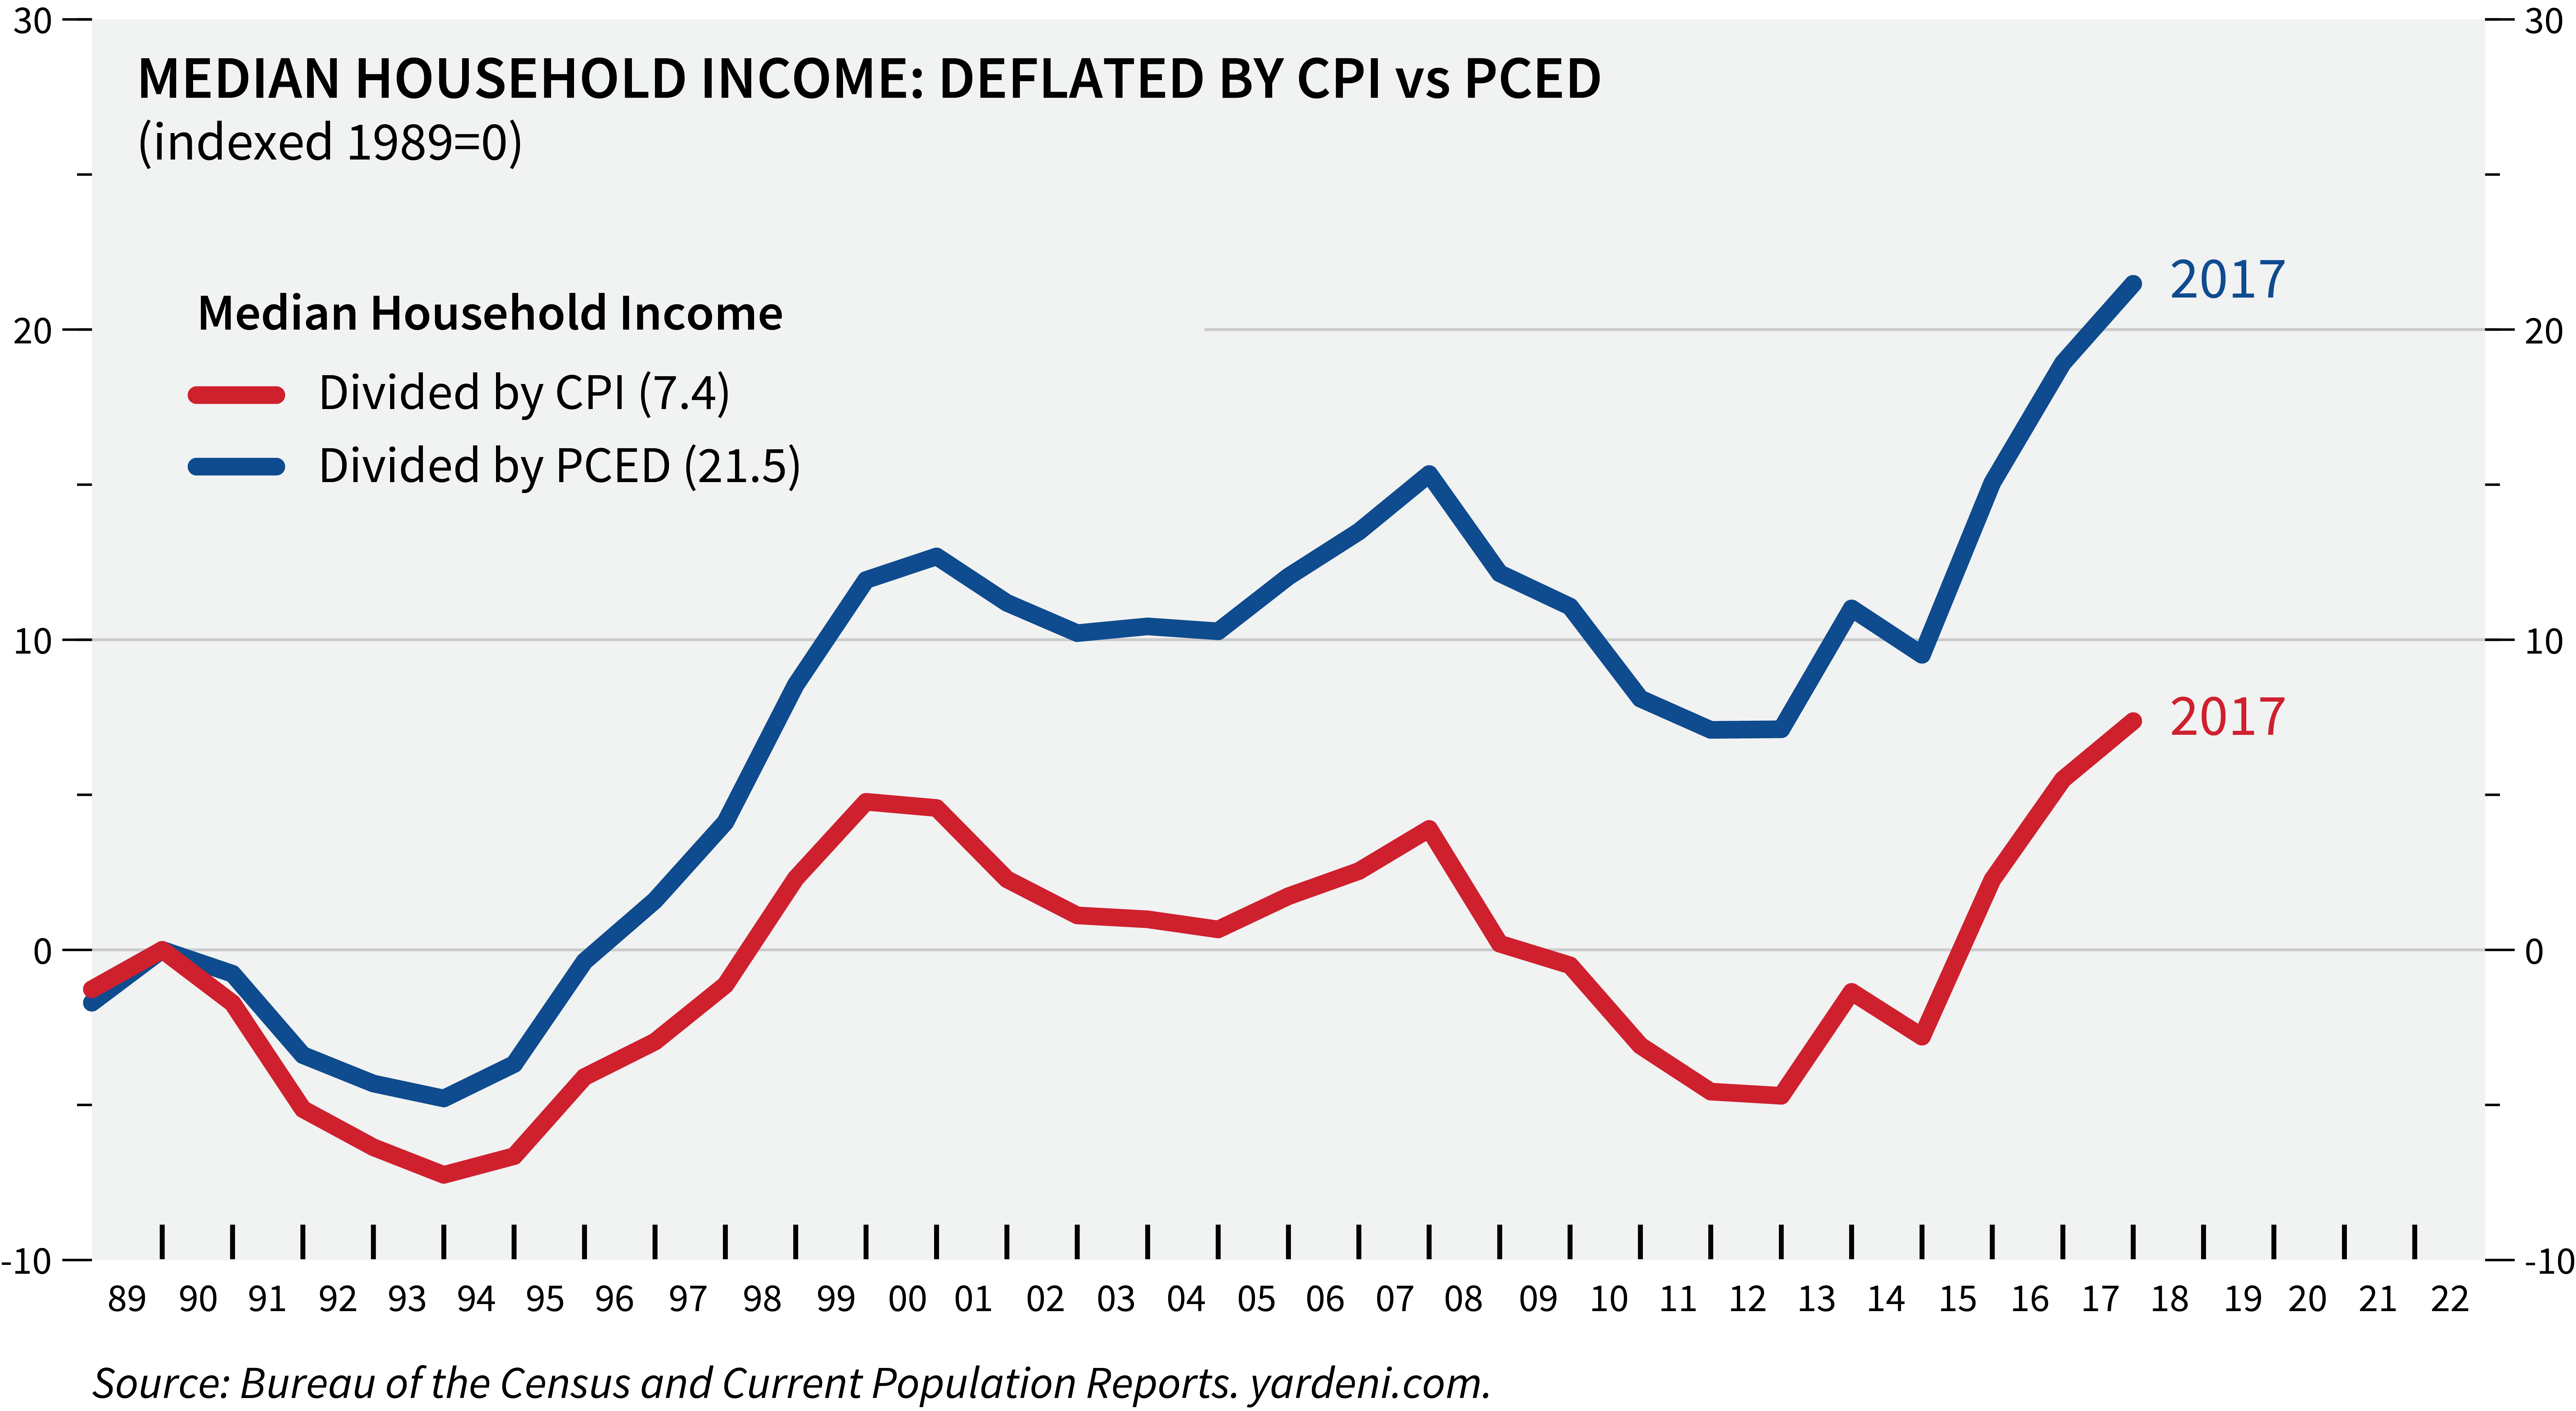 MEDIAN HOUSEHOLD INCOME : DEFLATED BY CPI vs PCED